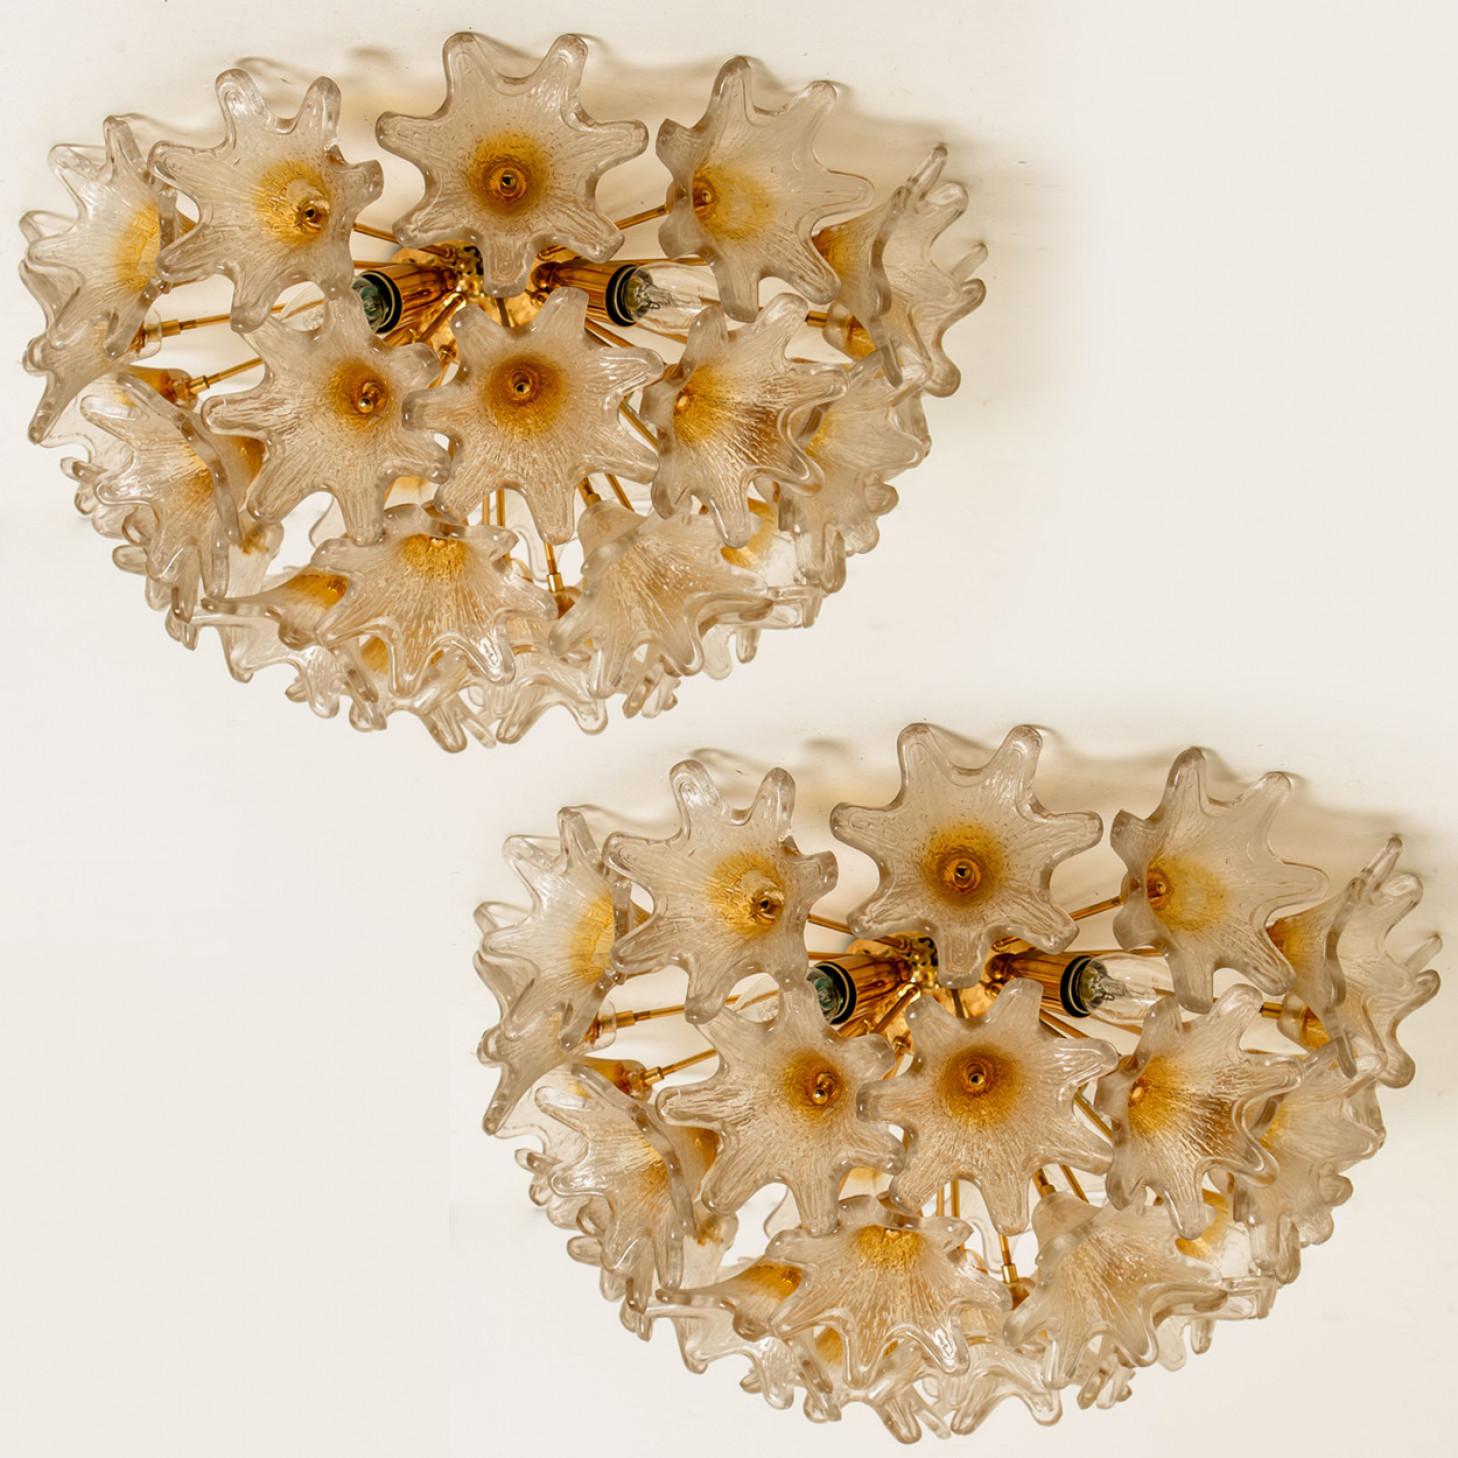 Elegant pair of Murano light fixtures in the style of Paolo Venini for VeArt, Italy, 1970s. Brass stem and hardware and white steel fixture. Several star shaped gold or amber and clear resembles flowers.

The set illuminates beautifully on wall and